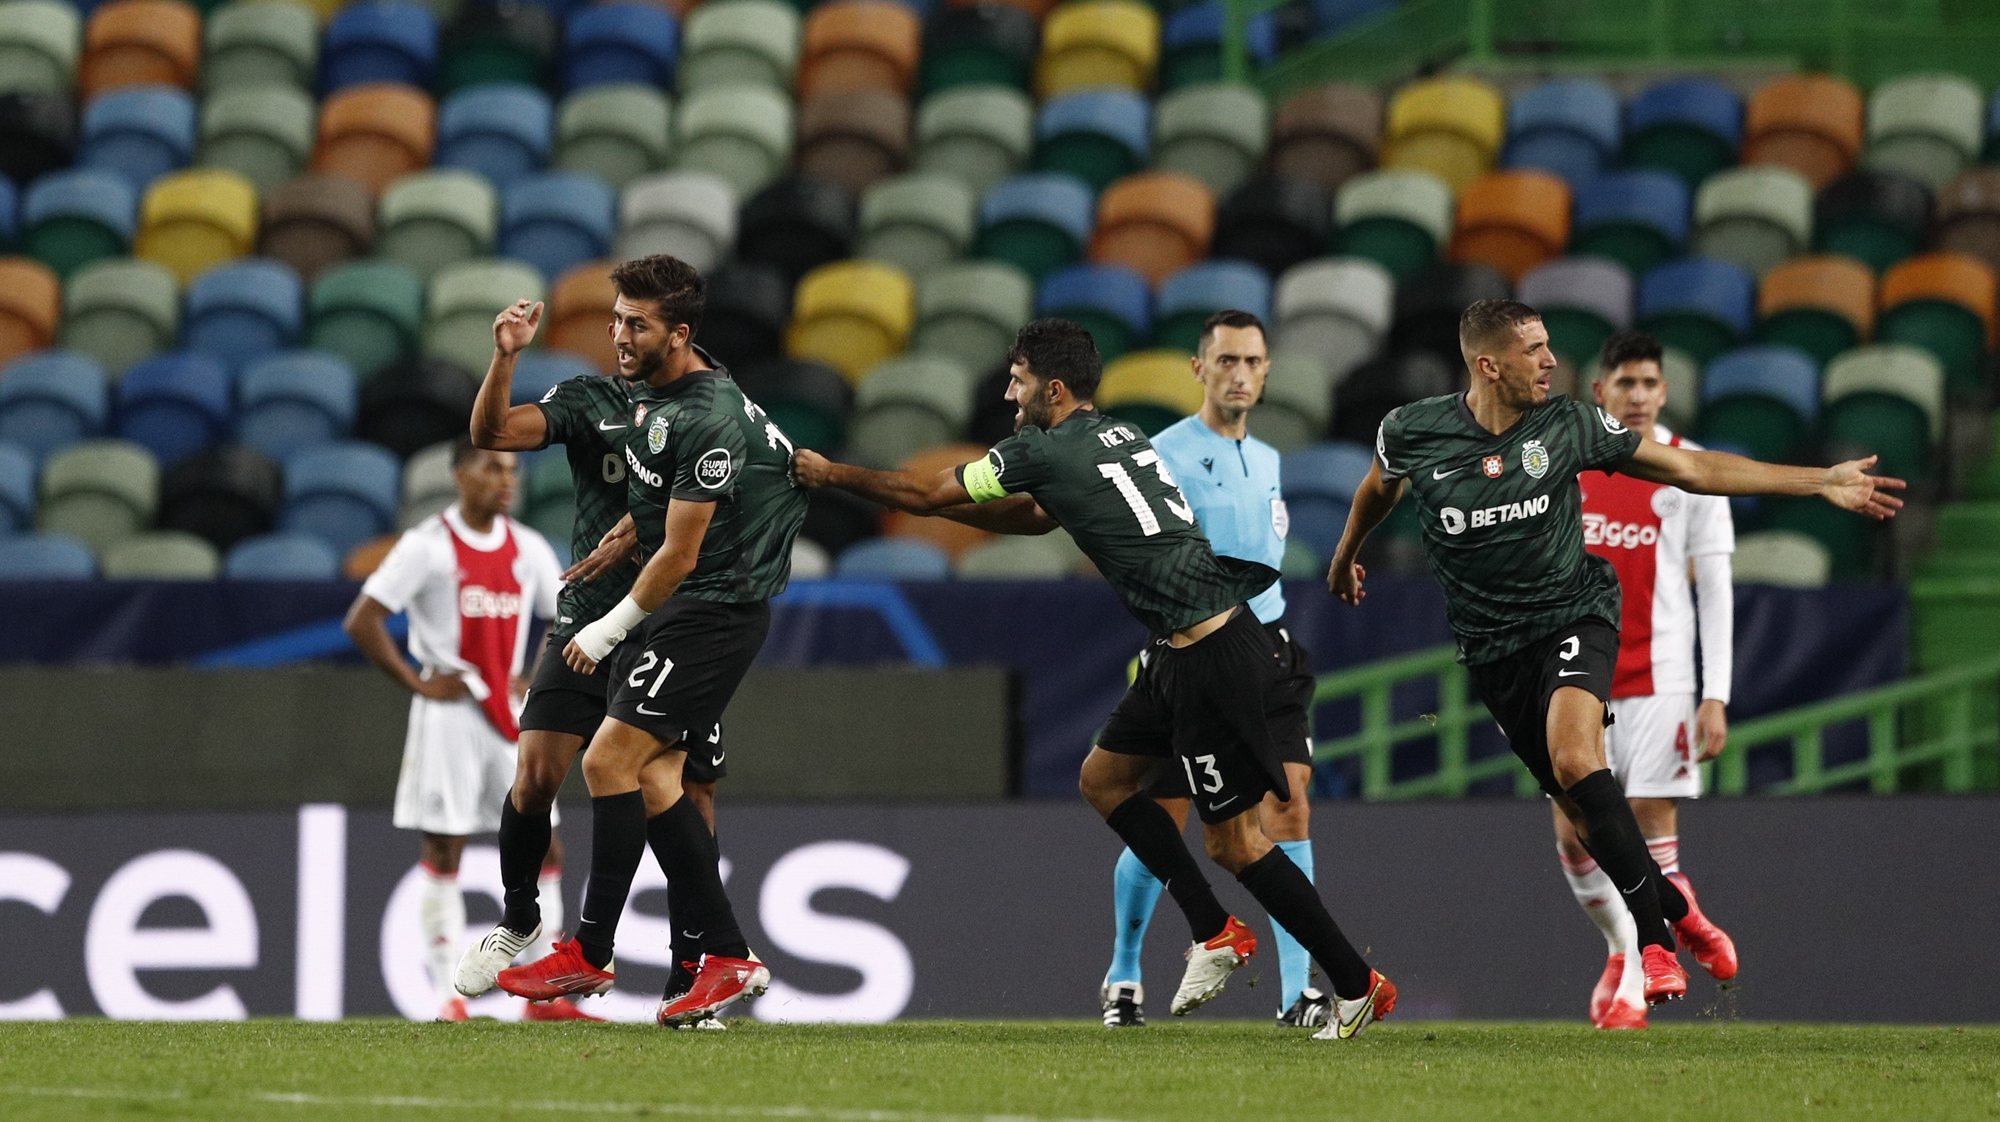 Sporting player Paulinho (L) celebrates after scoring a goal against Ajax during their UEFA Champions League Group C soccer match at Jose Alvalade Stadium in Lisbon, Portugal, 15 September 2021. ANTONIO COTRIM/LUSA